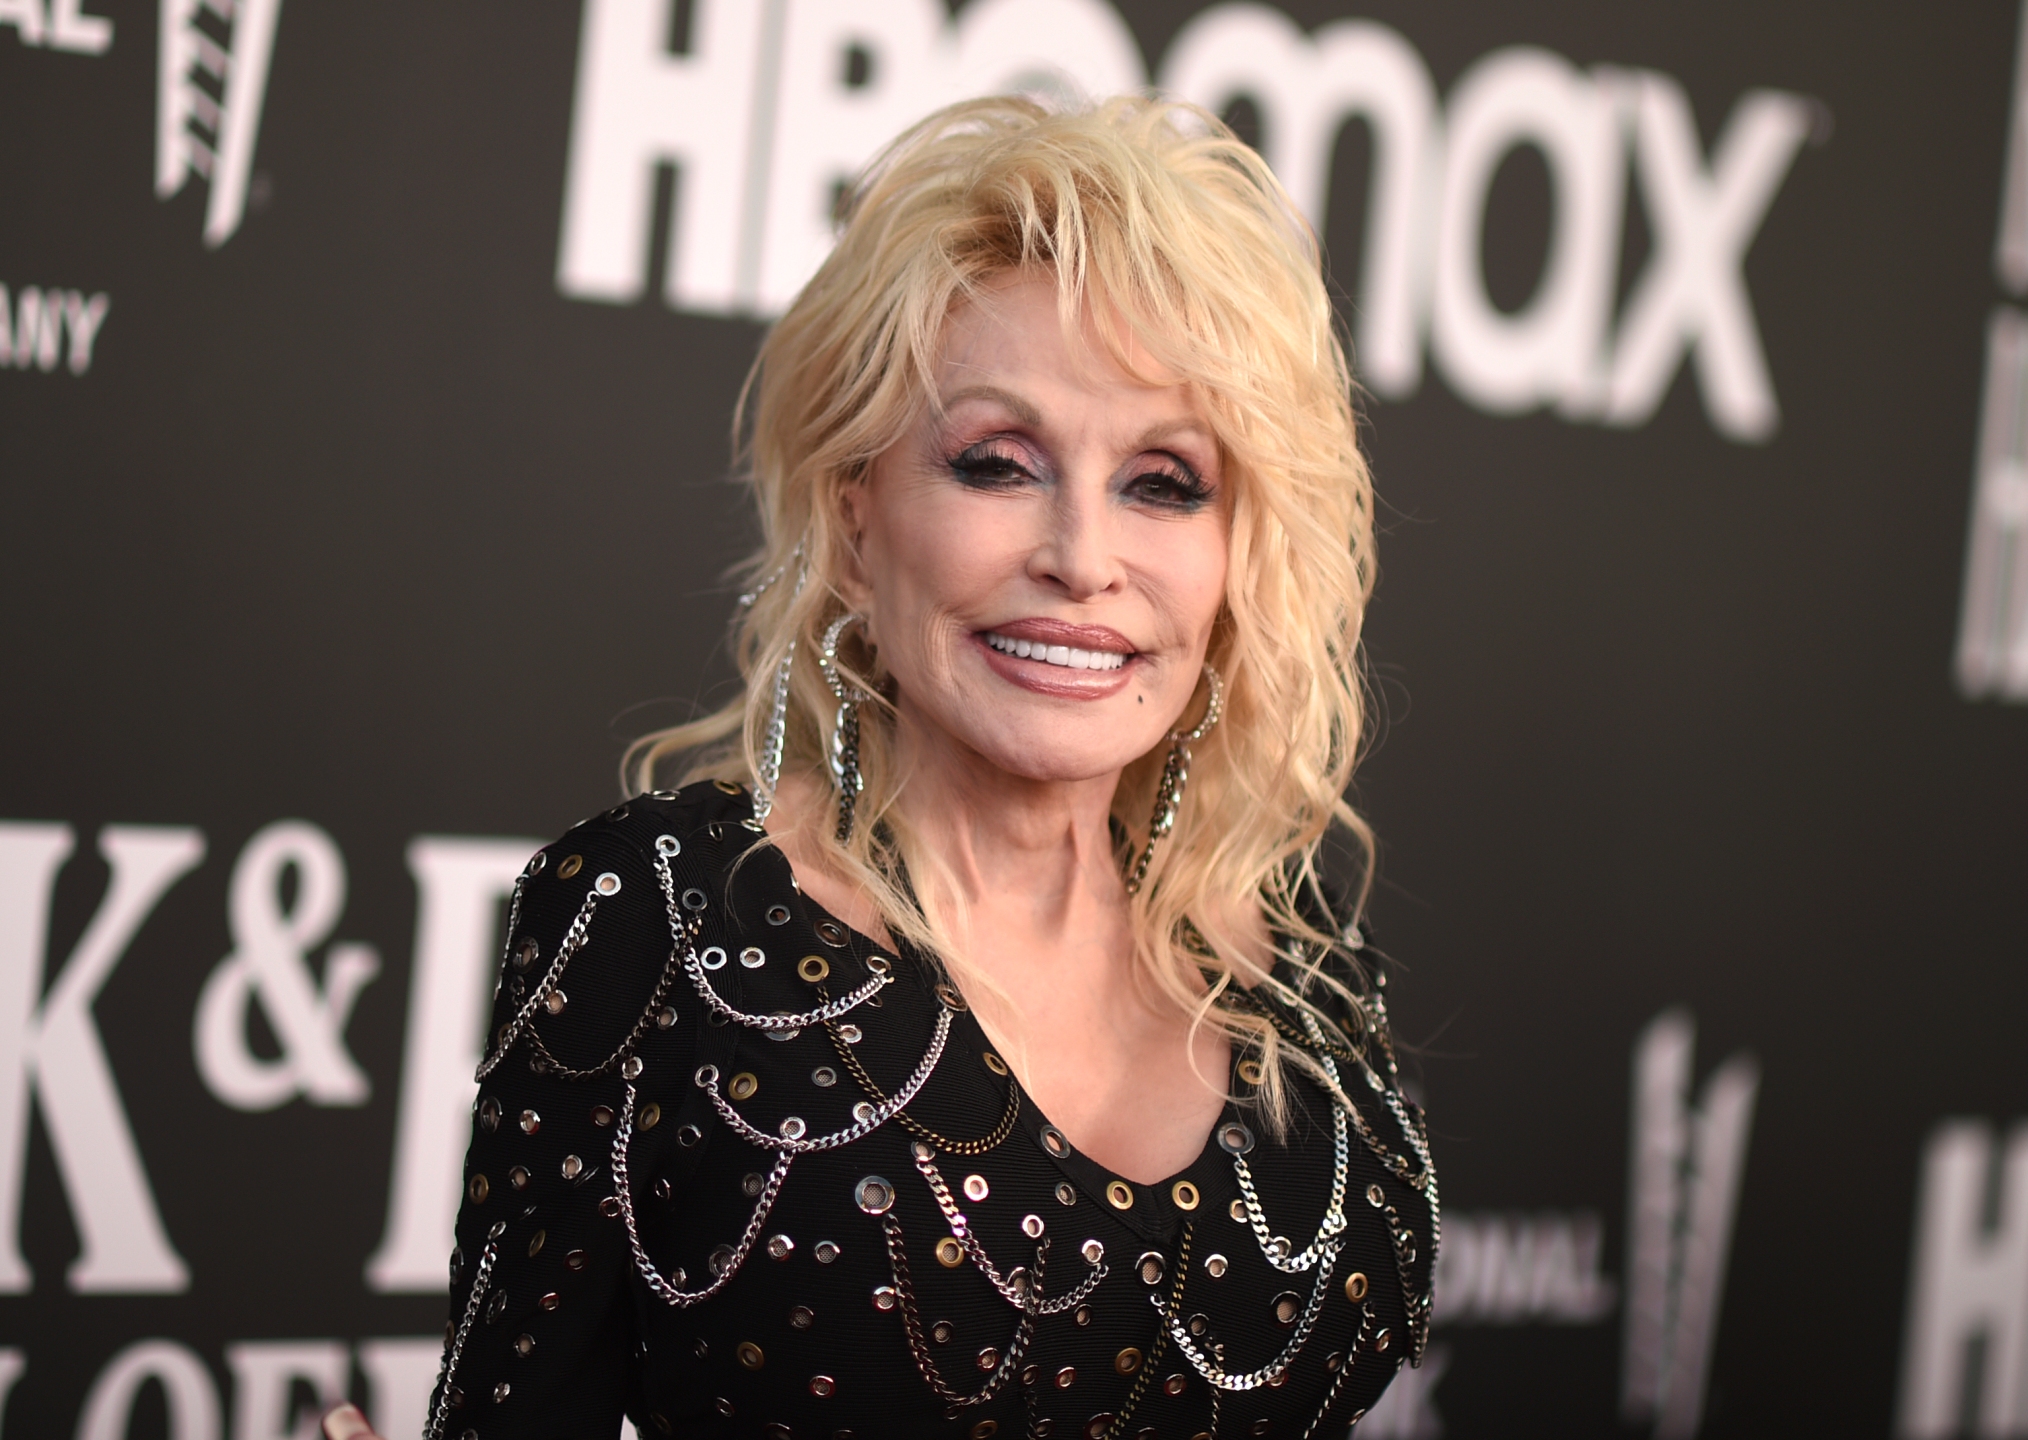 Dolly Parton wearing a black dress with chains